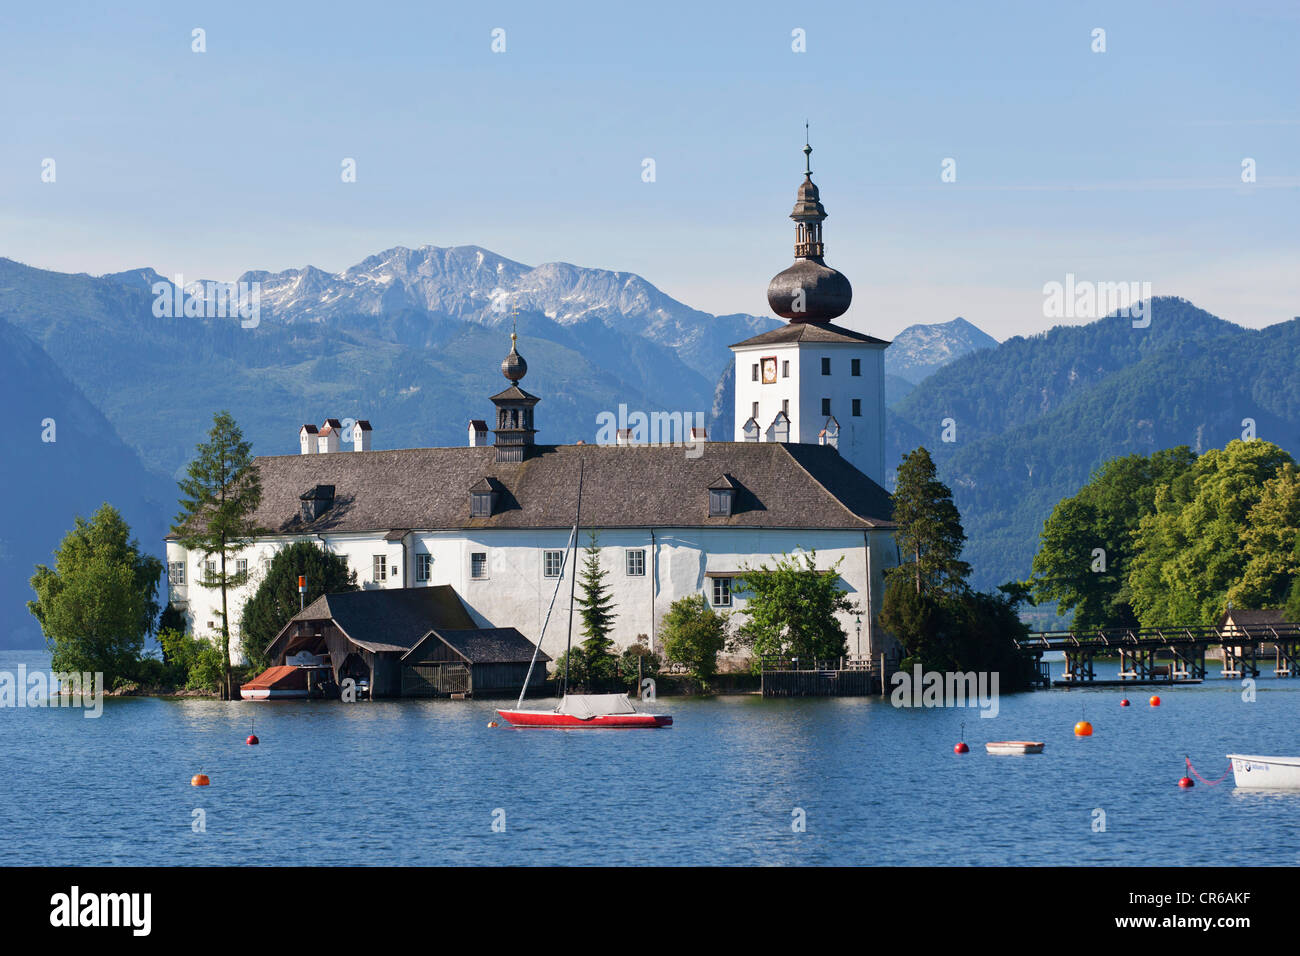 Austria, Gmunden,View of Ort castle and Traunsee Lake Stock Photo